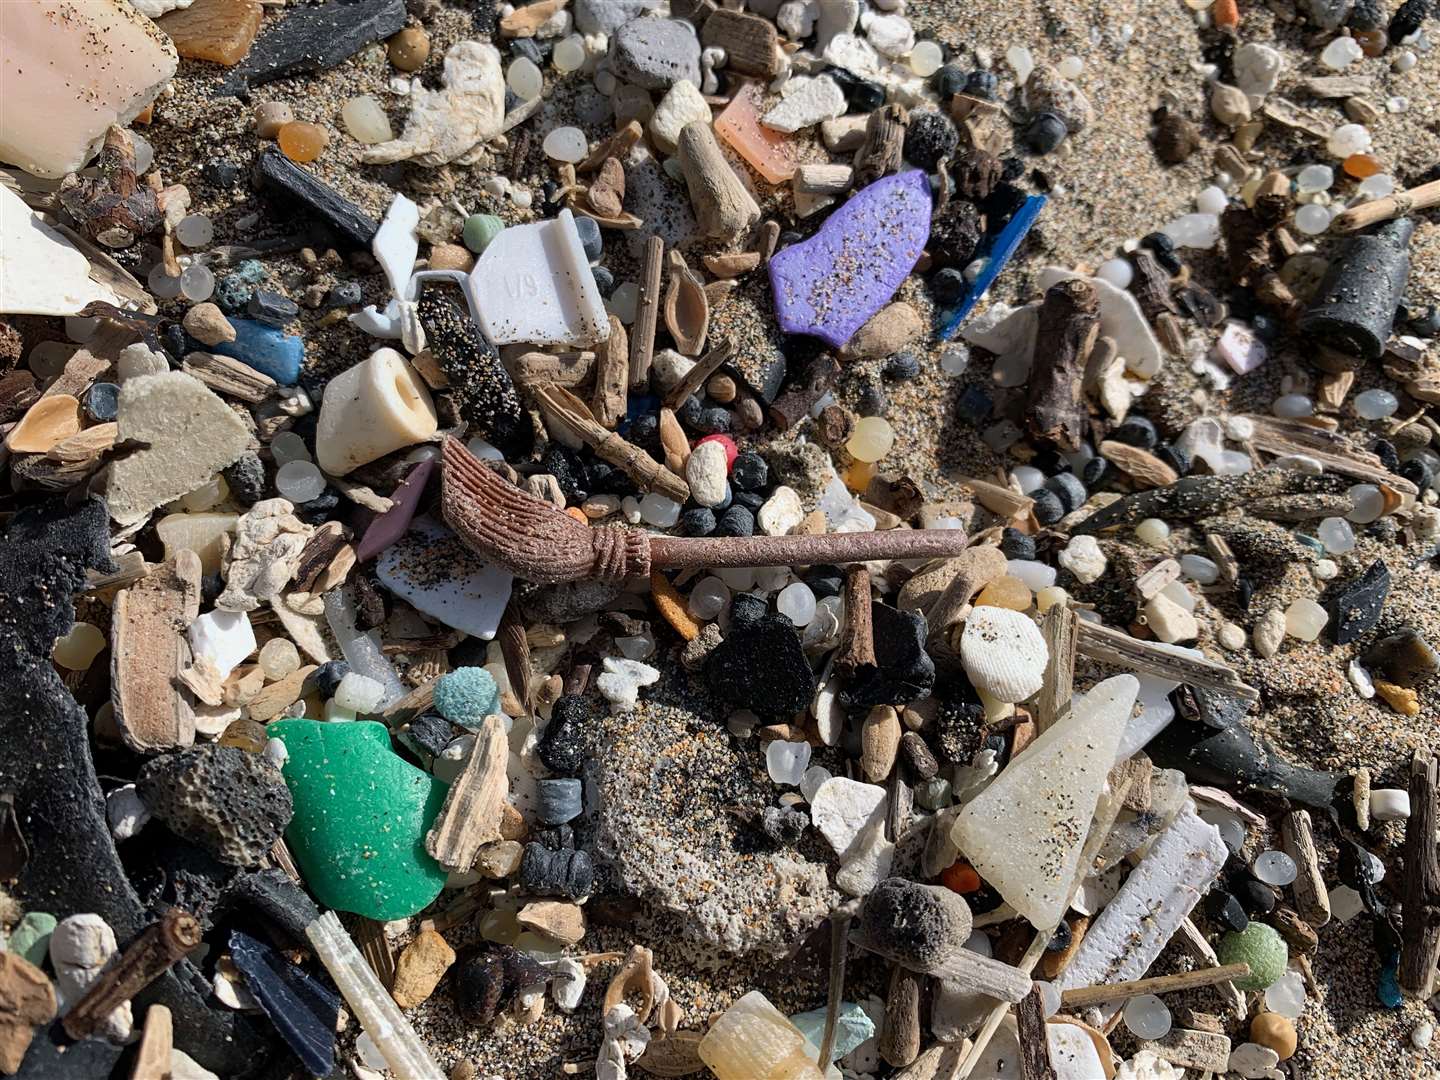 Brooms are among the Lego pieces that wash up on British shores (Vytautas/PA)